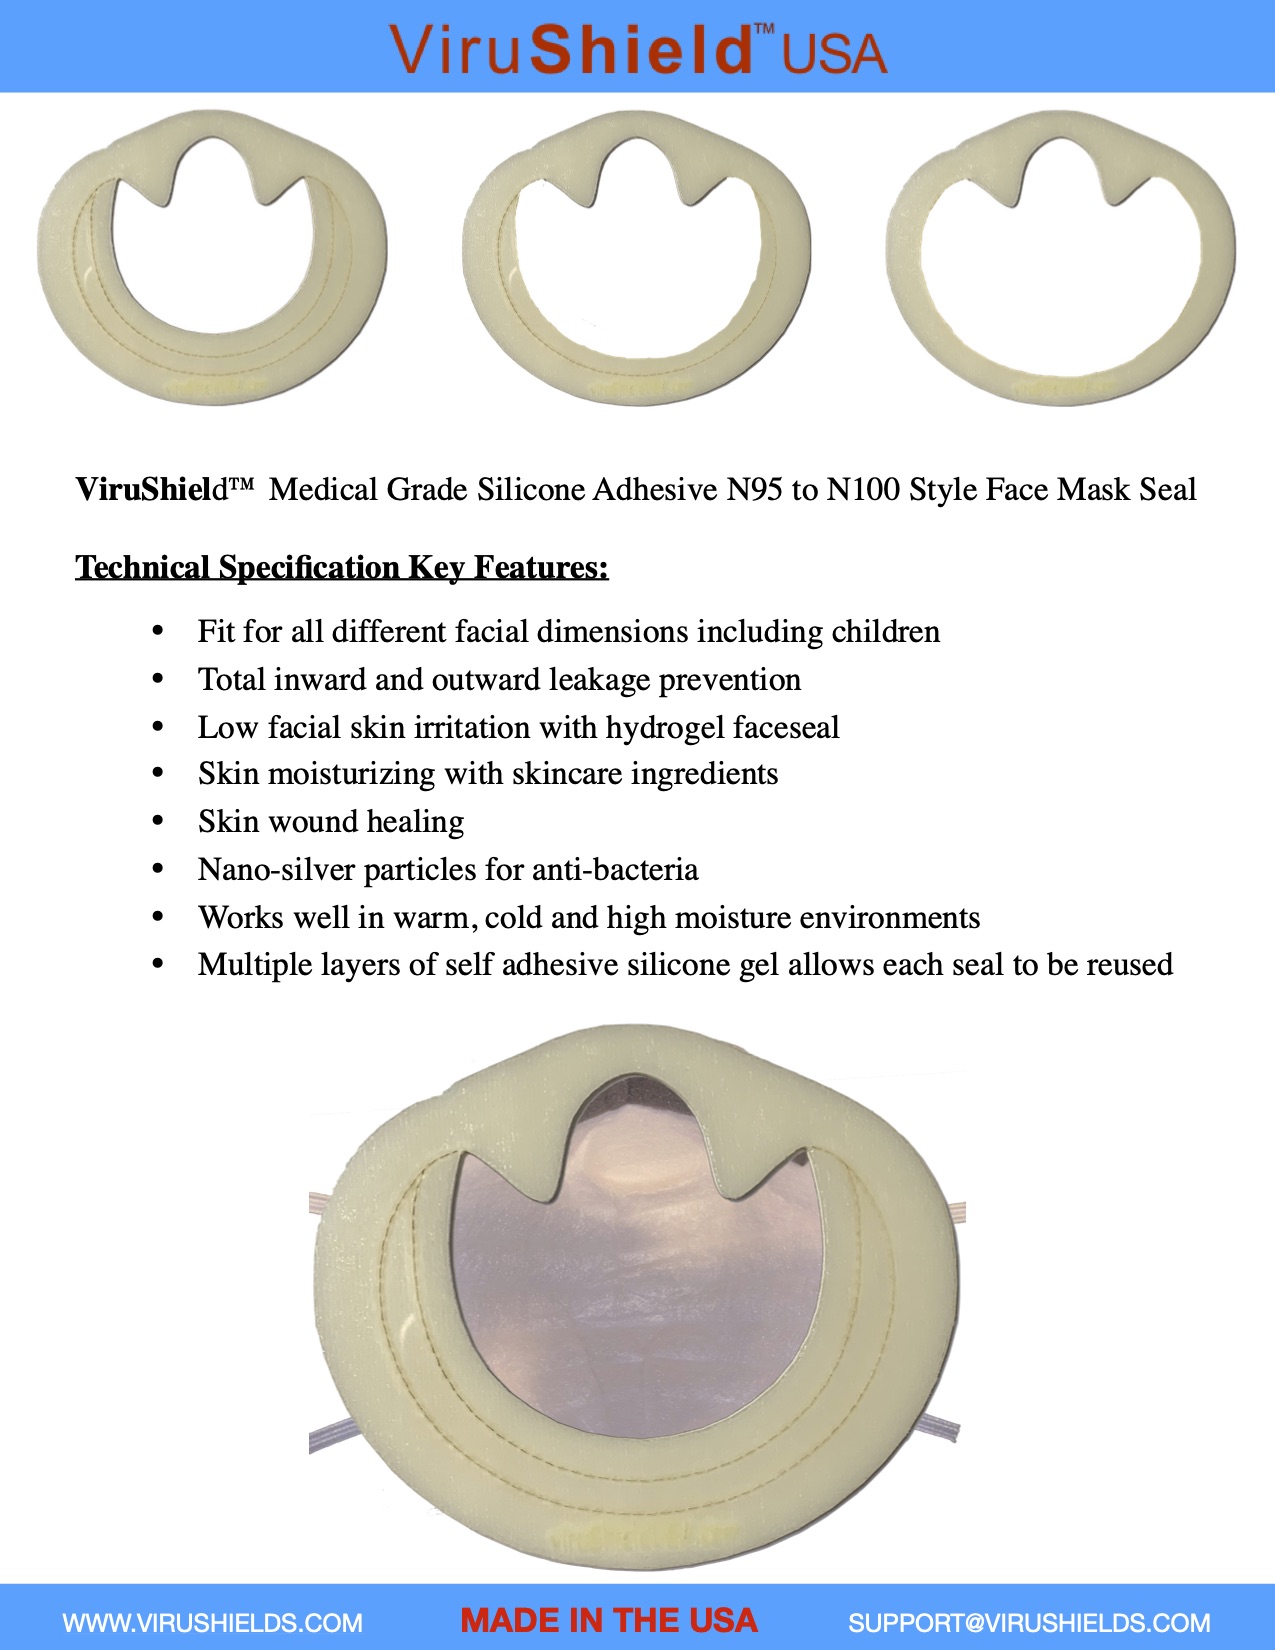 ViruShield™ Face to Mask Seal that prevents leakage and increase comfort for all face types including children